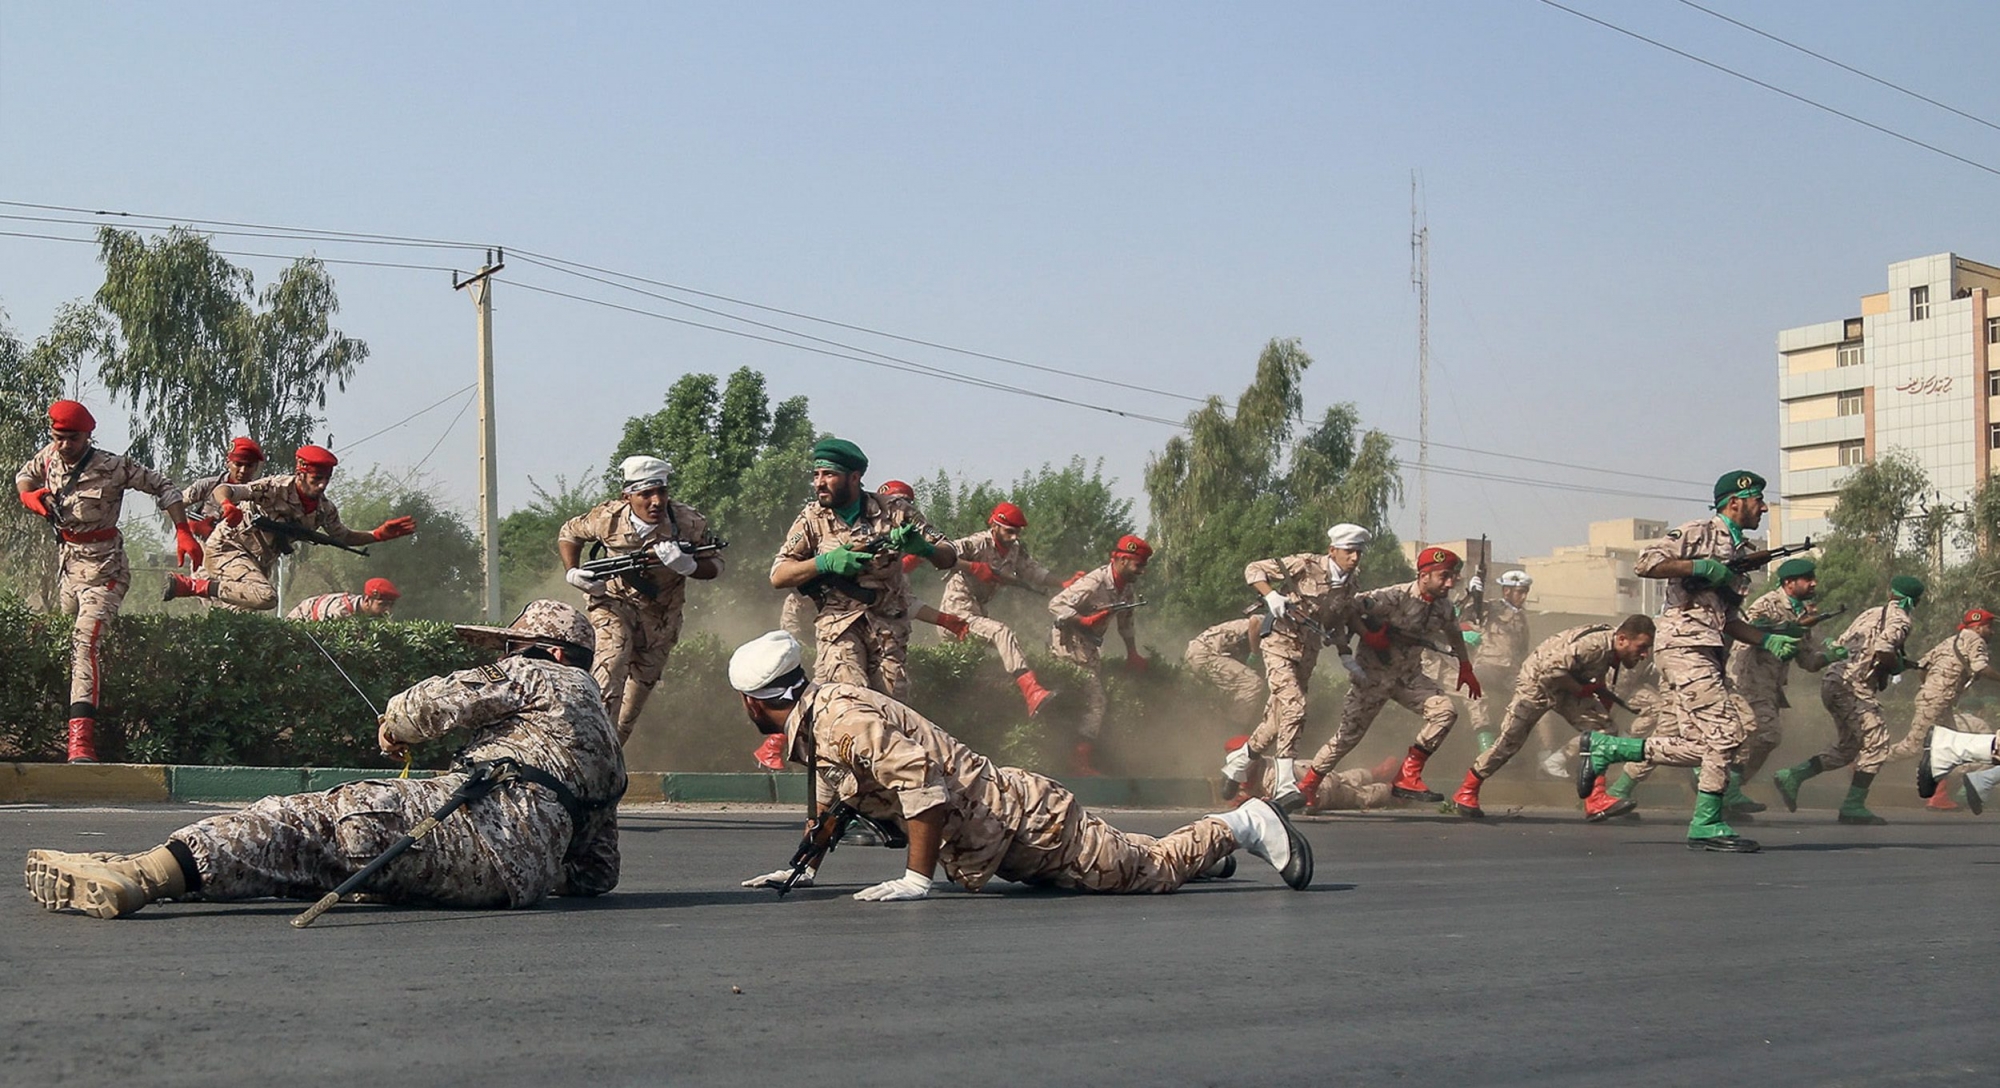 epaselect epa07039277 Iranian soldiers jump over a hedge at a street as they run for cover during a terror attack that occurred during a military parade in the city of Ahvaz, southwest Iran, 22 September 2018. According to media reports, gunmen have opened fire during an Iranian military parade in the south-western city of Ahvaz, killing at least 25 people, including civilians, and injuring dozens.  EPA/MORTEZA JABERIAN epaselect IRAN TERROR ATTACK